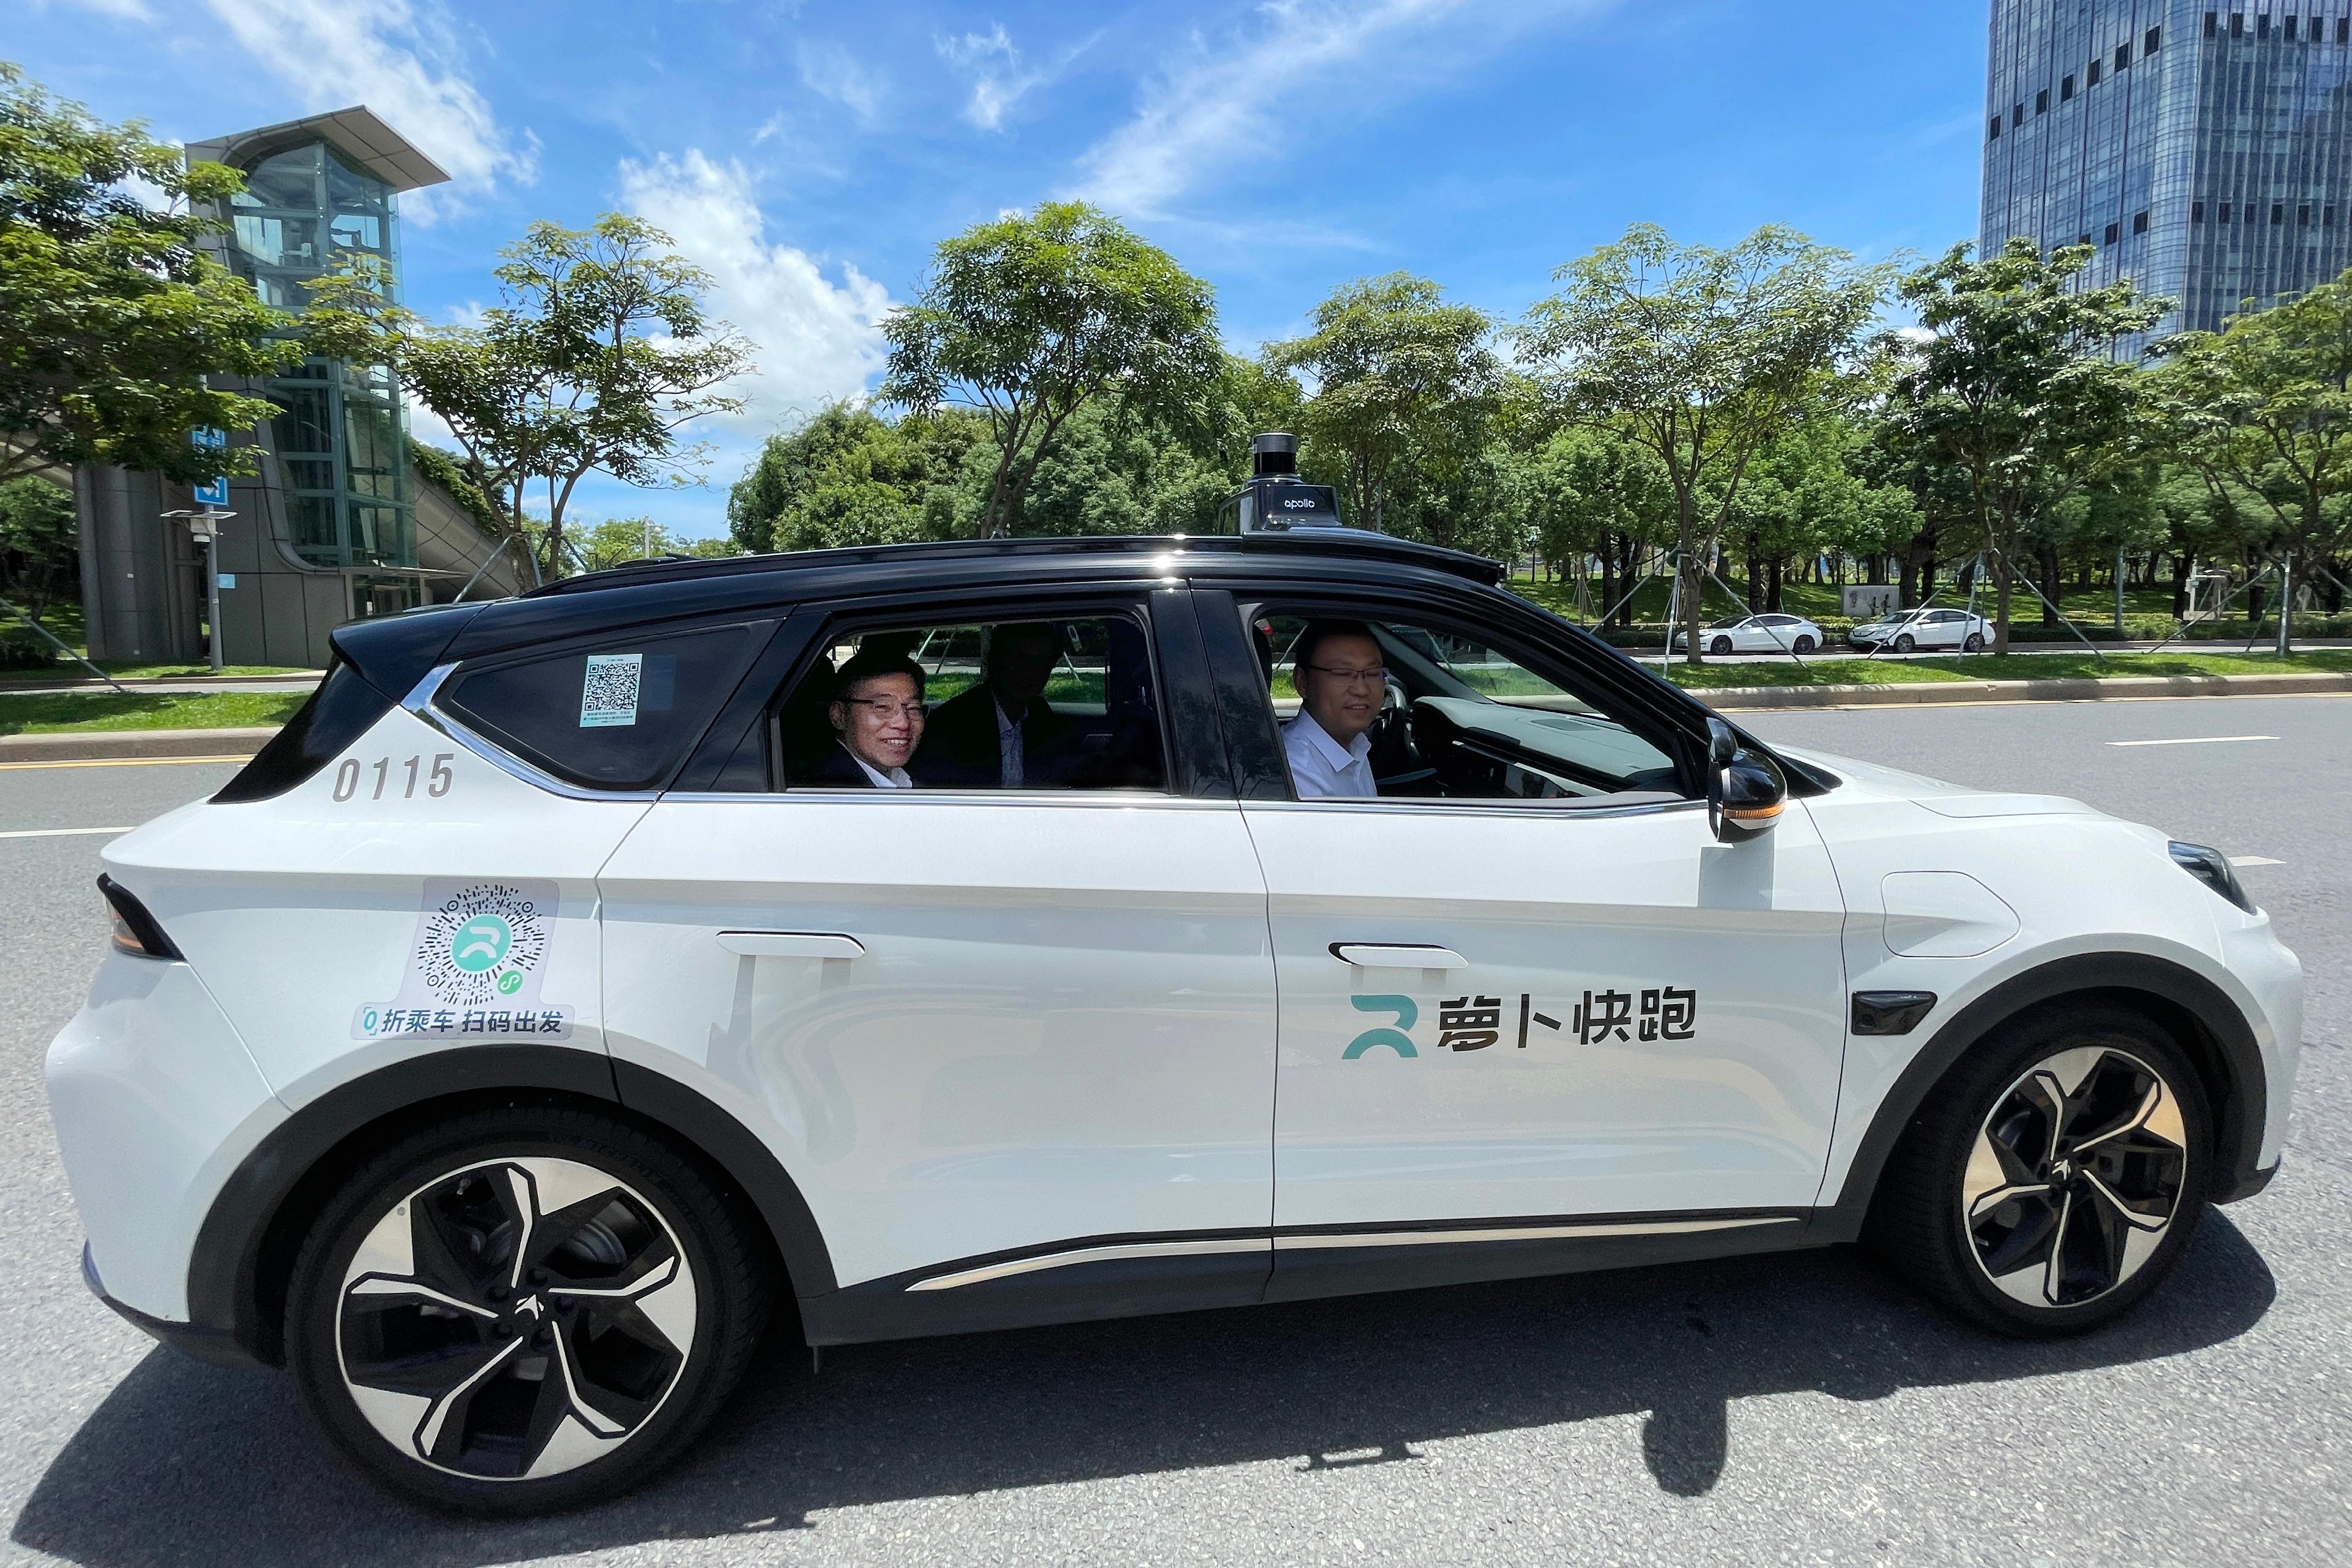 The Secretary for Transport and Logistics, Mr Lam Sai-hung (left), today (July 20) took a test ride in an autonomous vehicle in Nanshan, Shenzhen.
